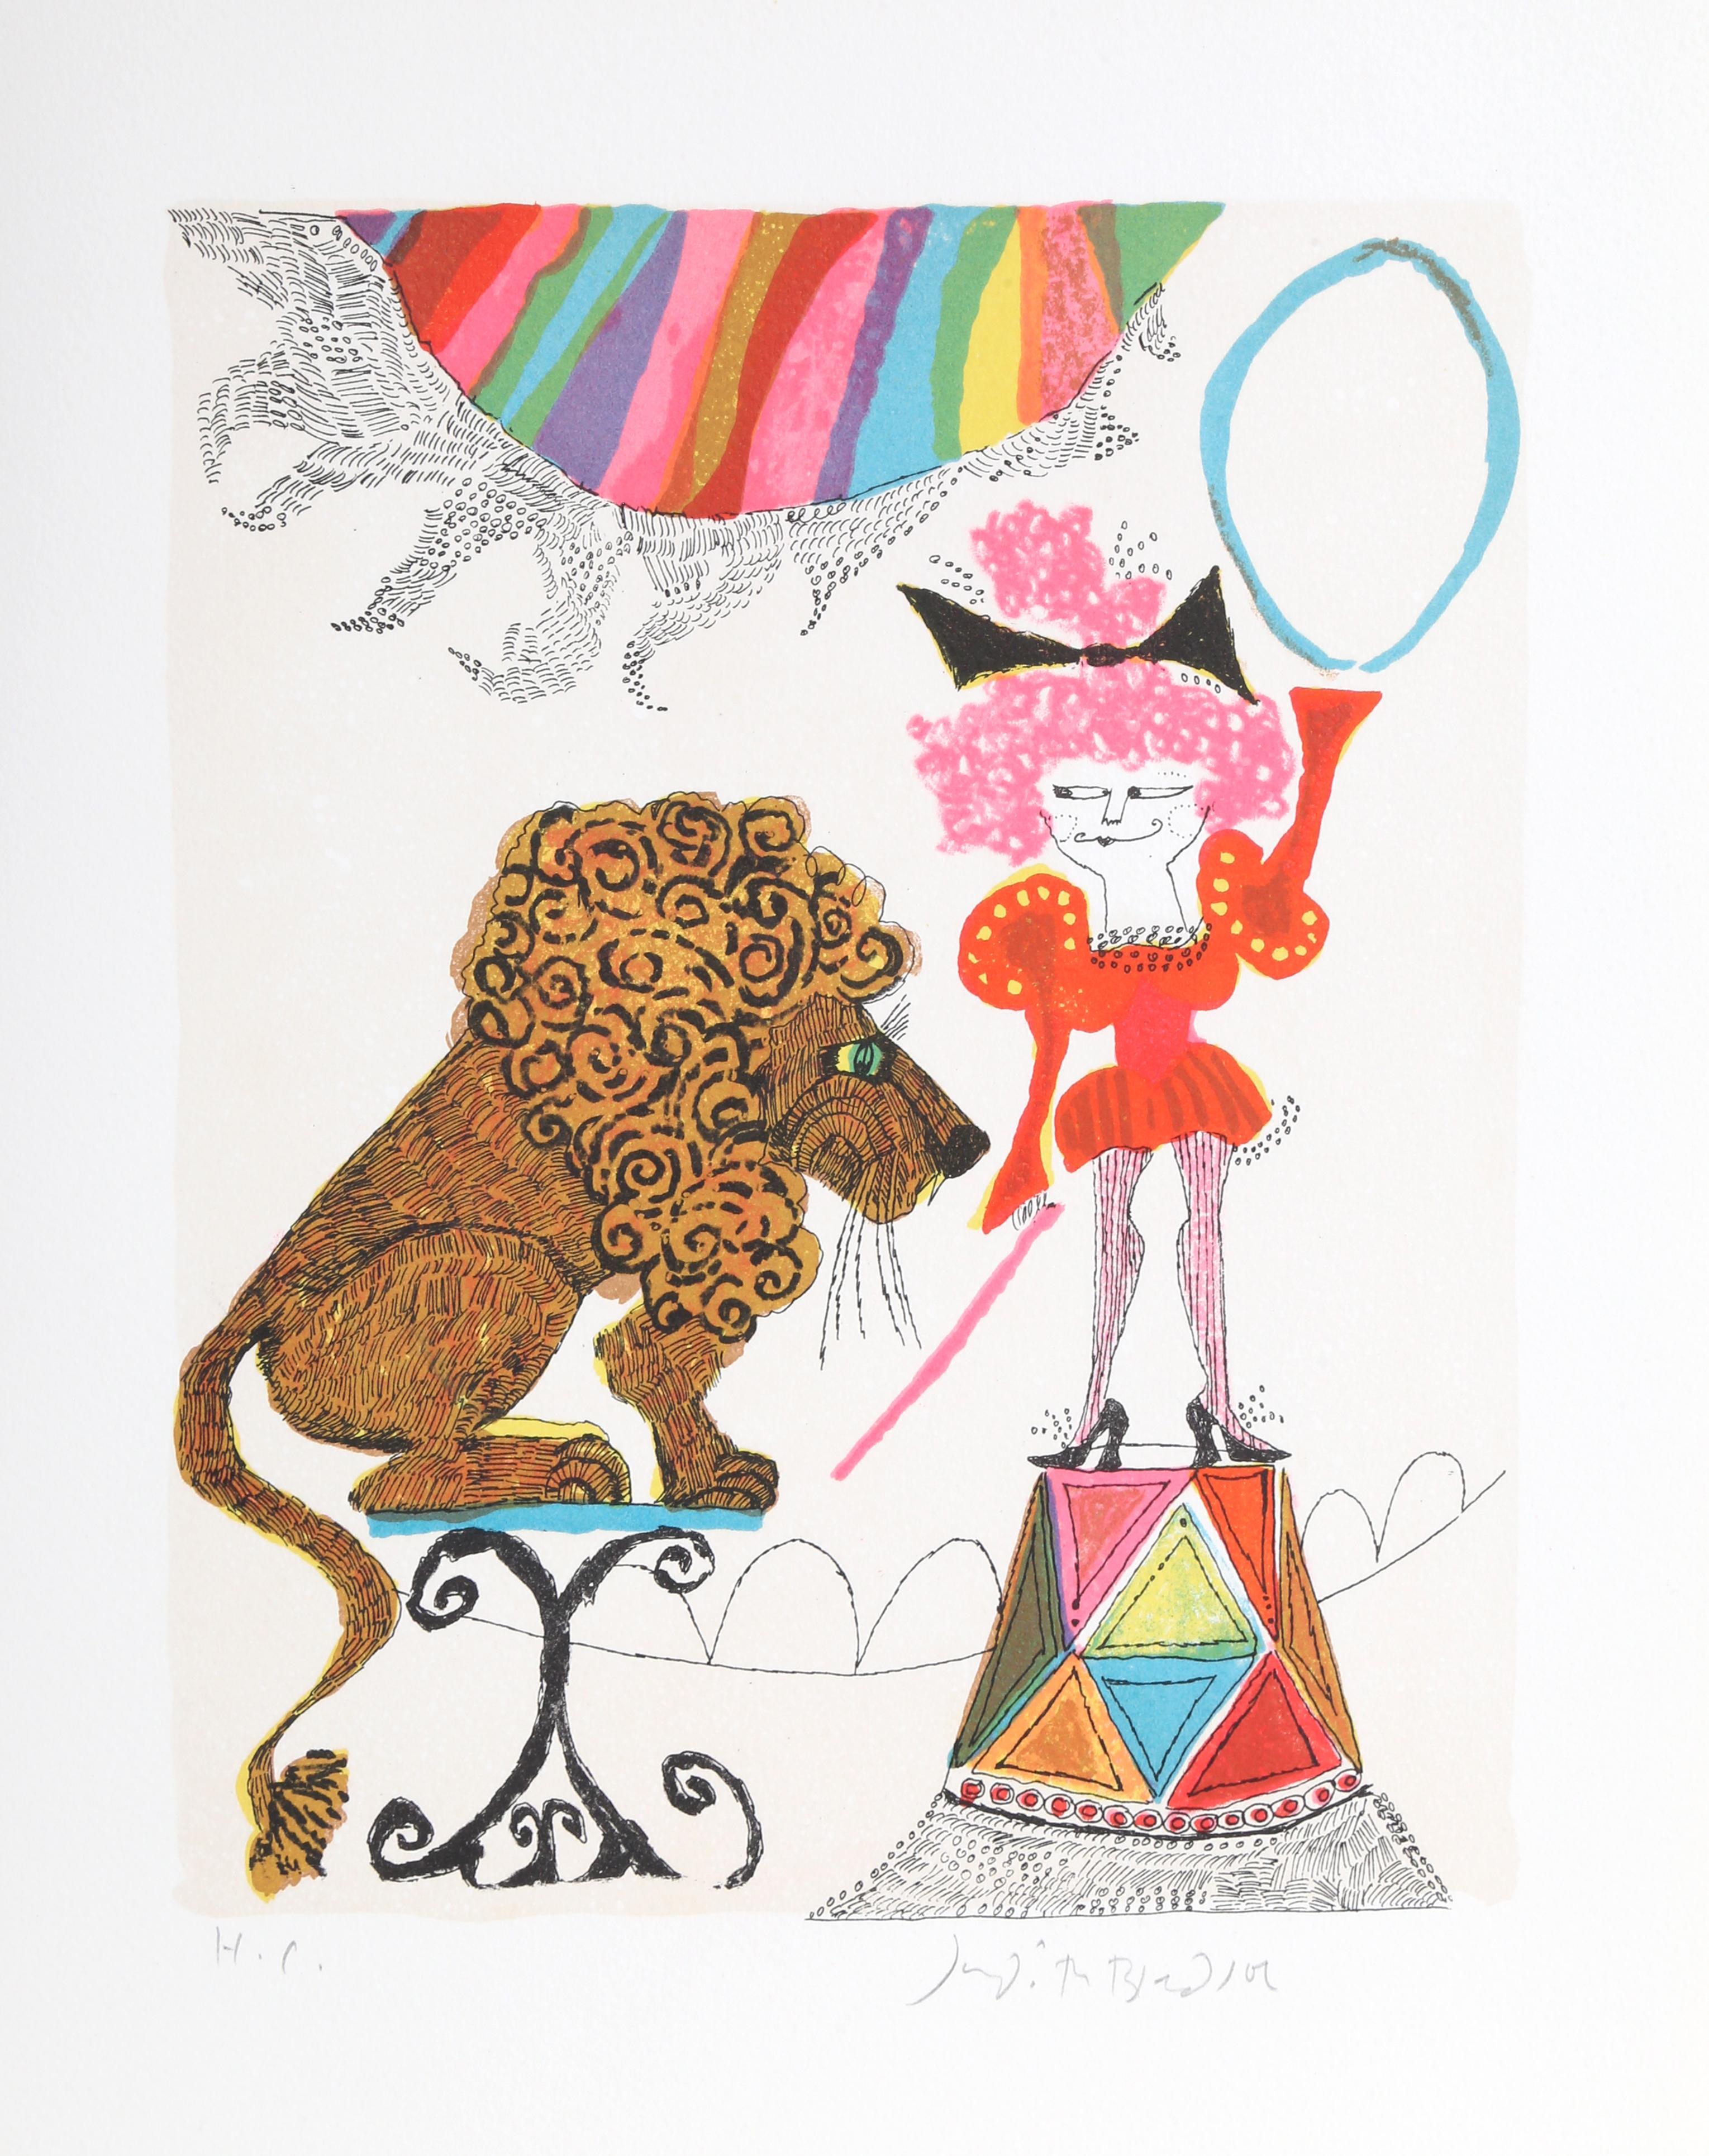 Judith Bledsoe, American (1938 - 2013) -  Lion Tamer from A Little Circus. Year: 1974, Medium: Lithograph, signed in pencil, Edition: HC, Size: 15  x 10.5 in. (38.1  x 26.67 cm), Description: Sitting on a small stool, the lion in this Judith Bledsoe